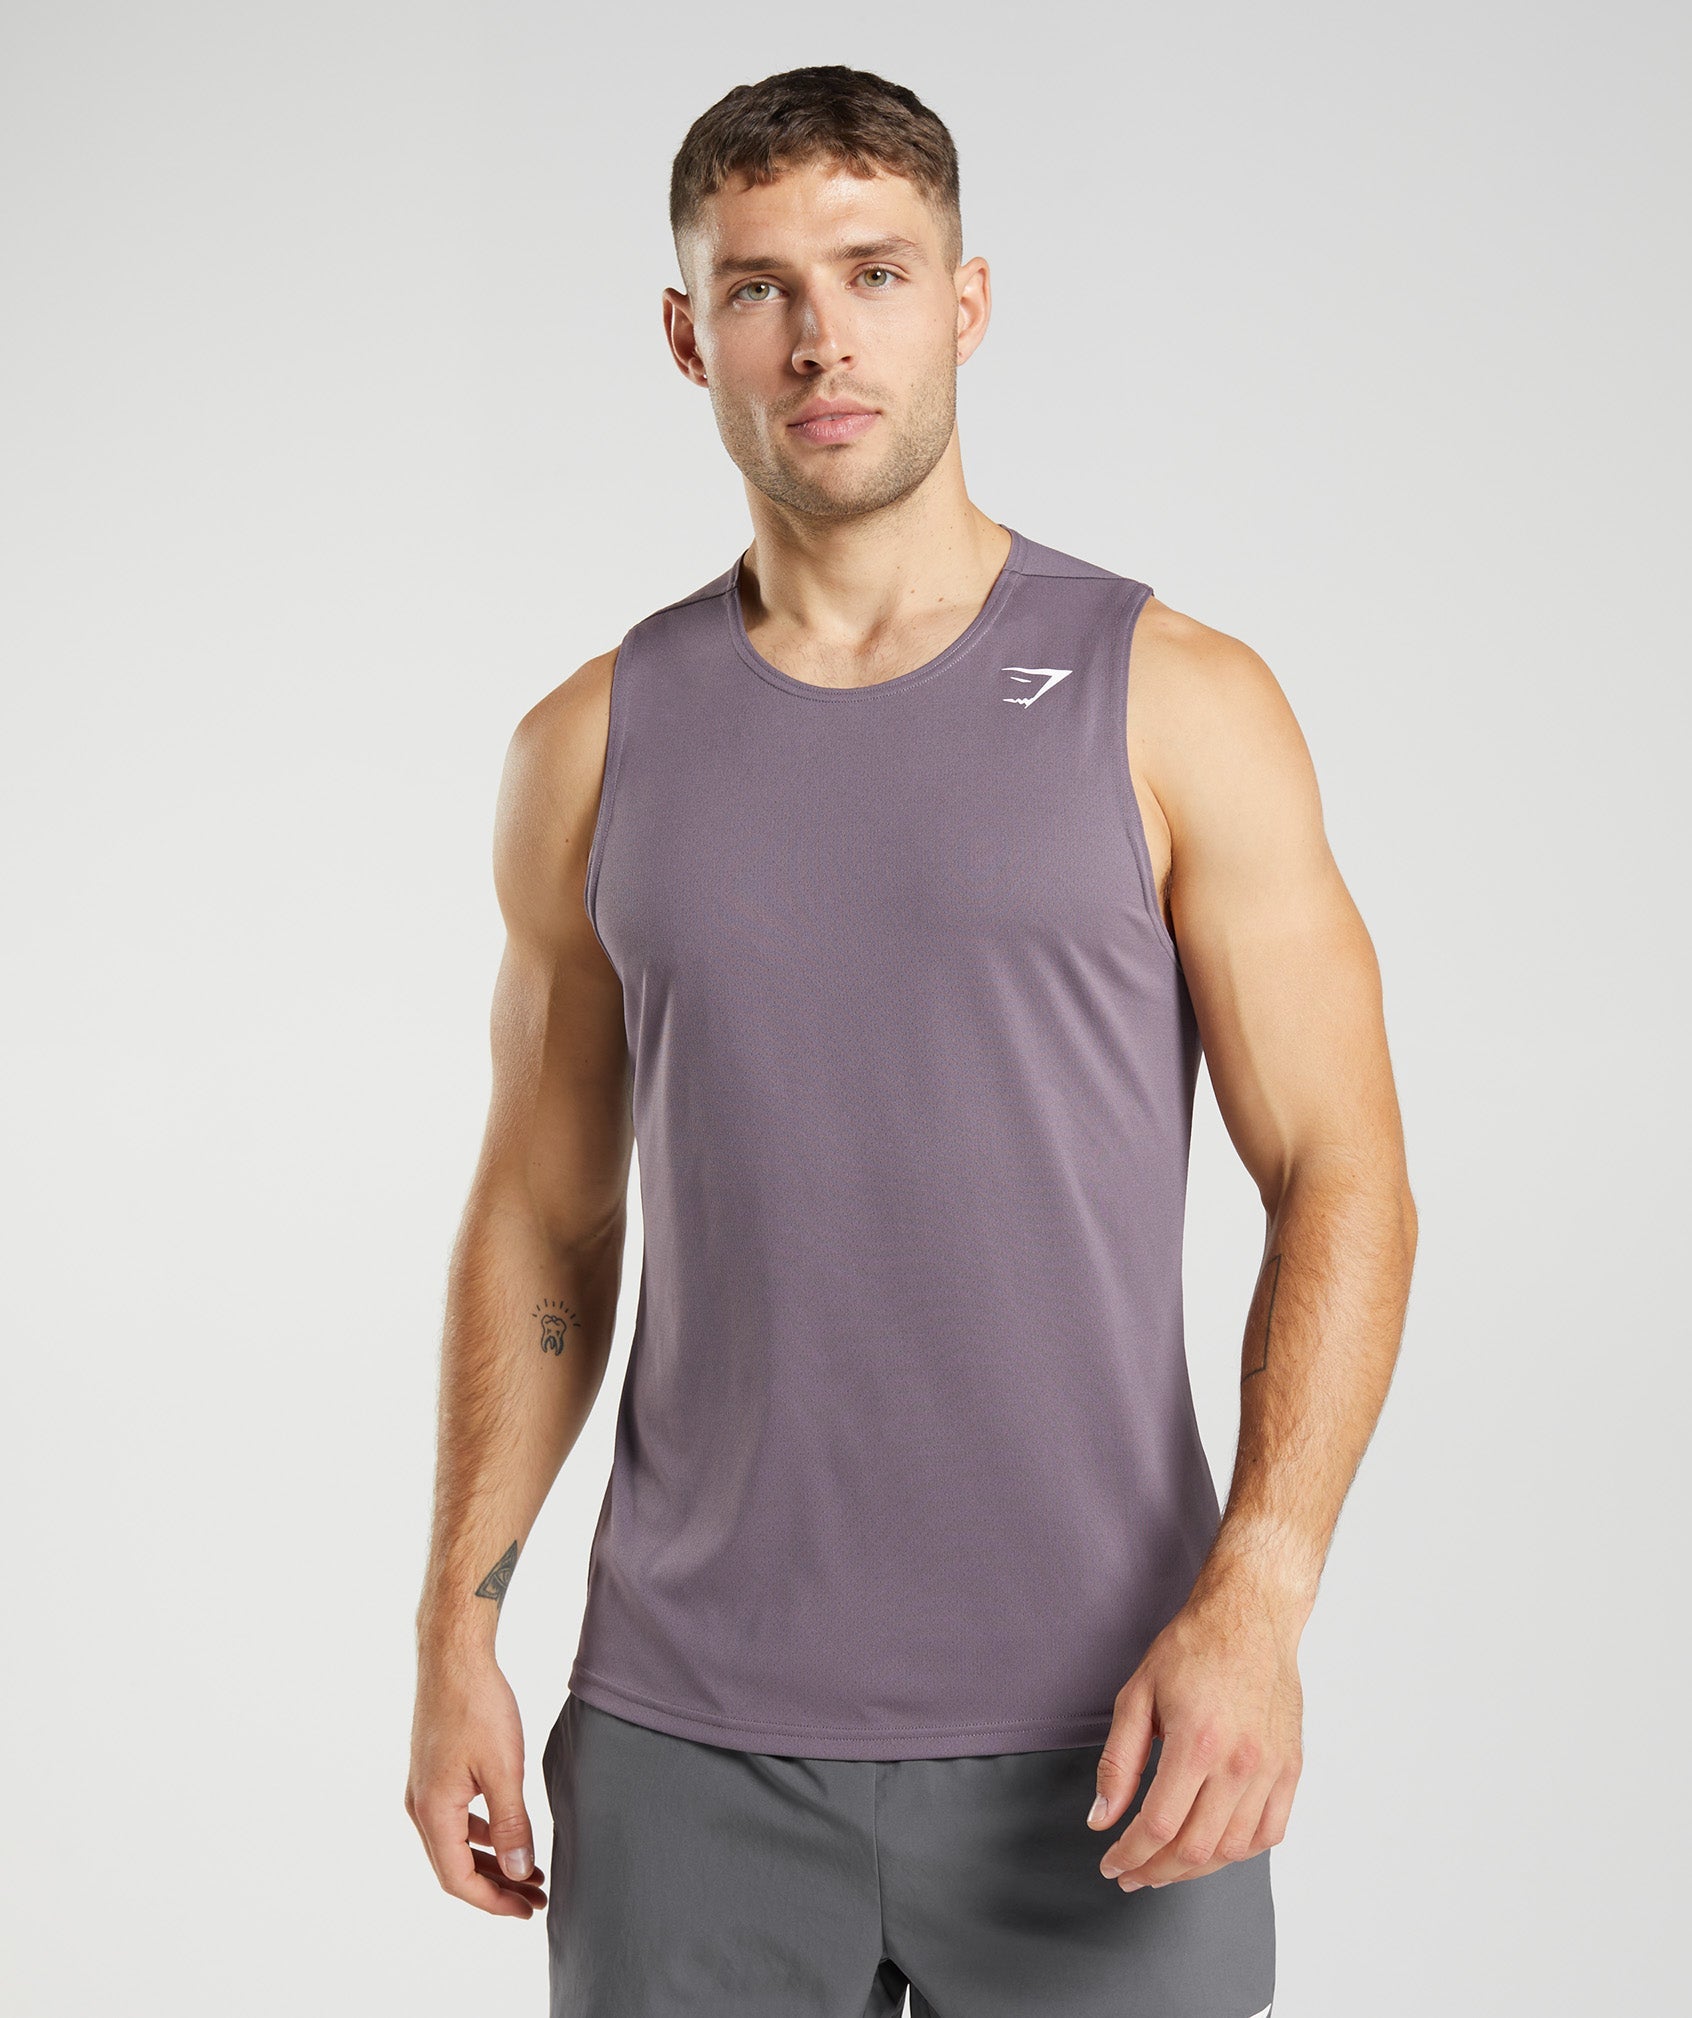 Arrival Tank in Musk Lilac - view 1